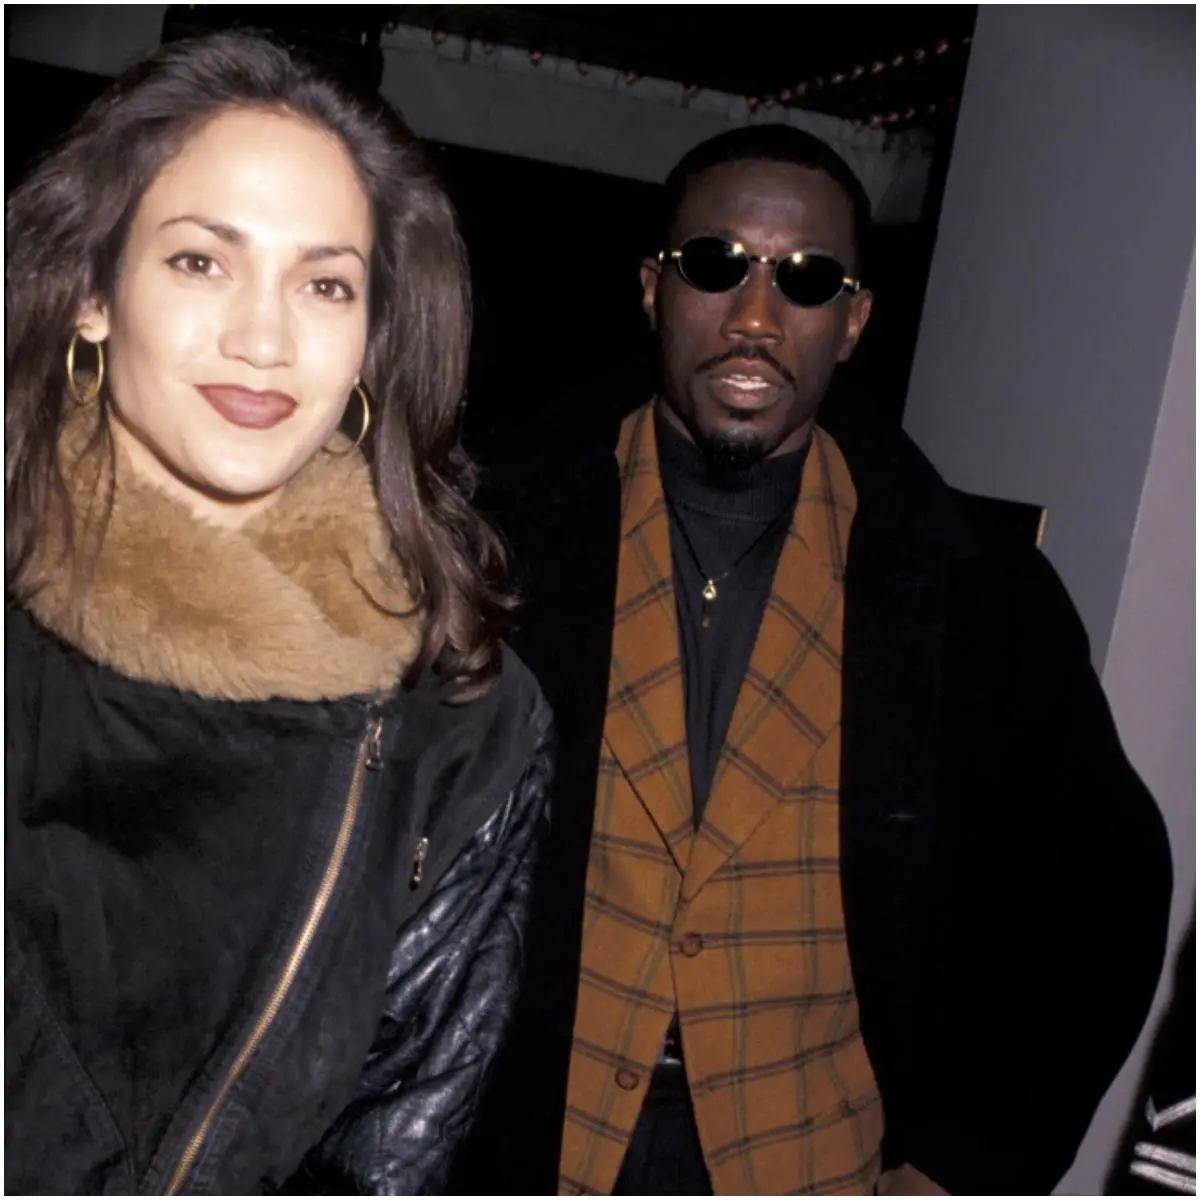 Wesley Snipes with his girlfriend Jennifer Lopez